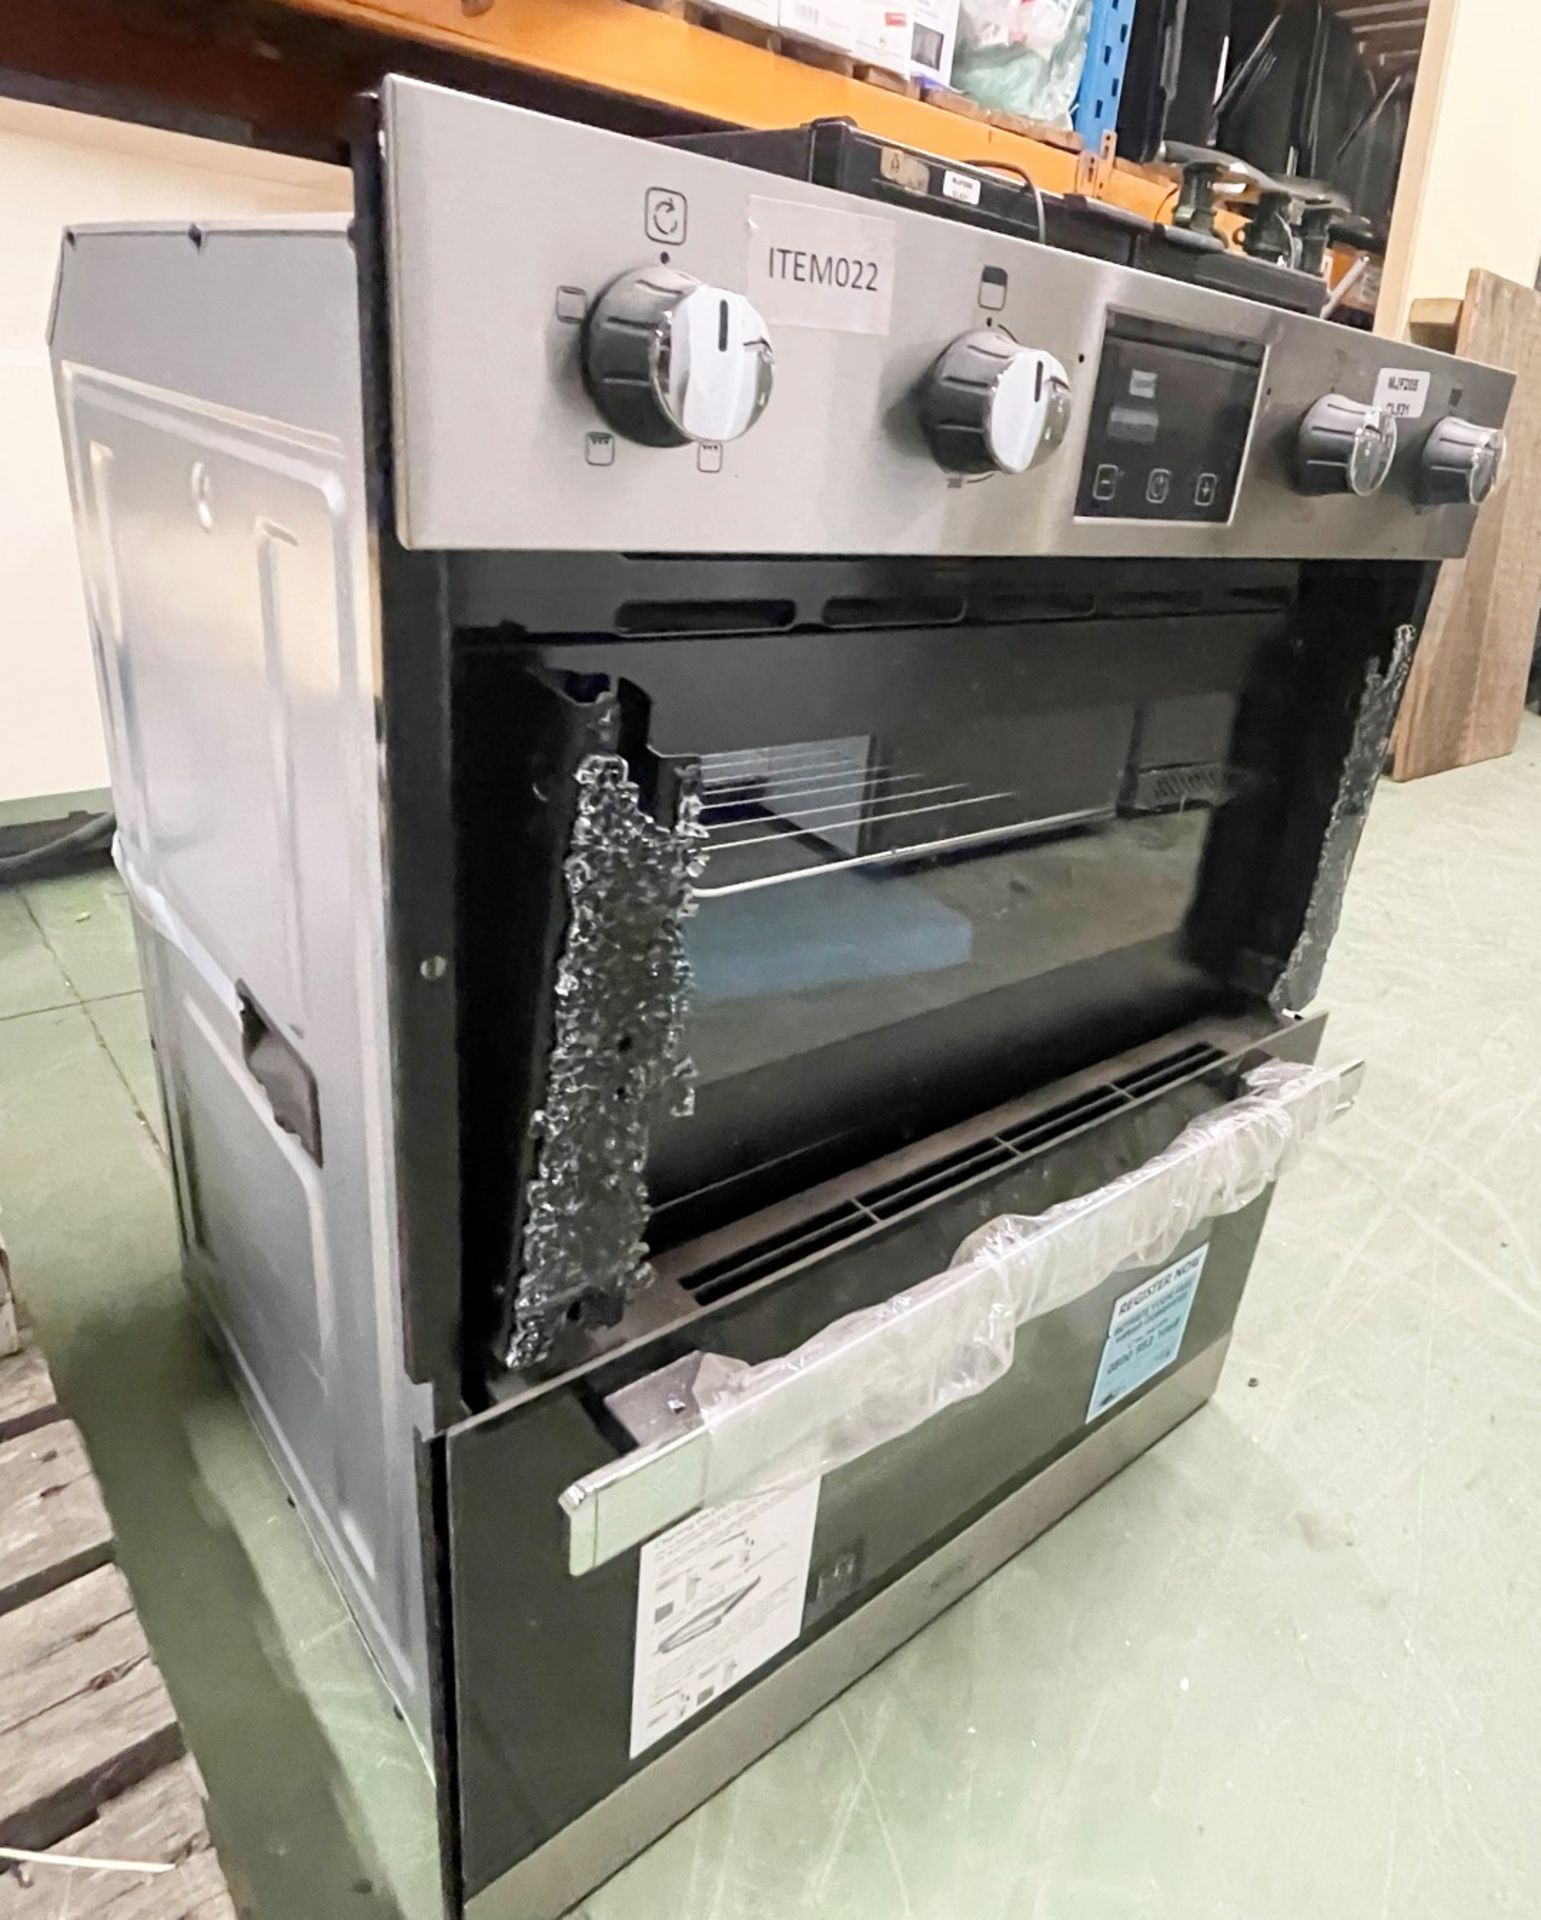 1 x Belling Integrated Oven - New and Unused With Damaged Glass Door - Image 7 of 7